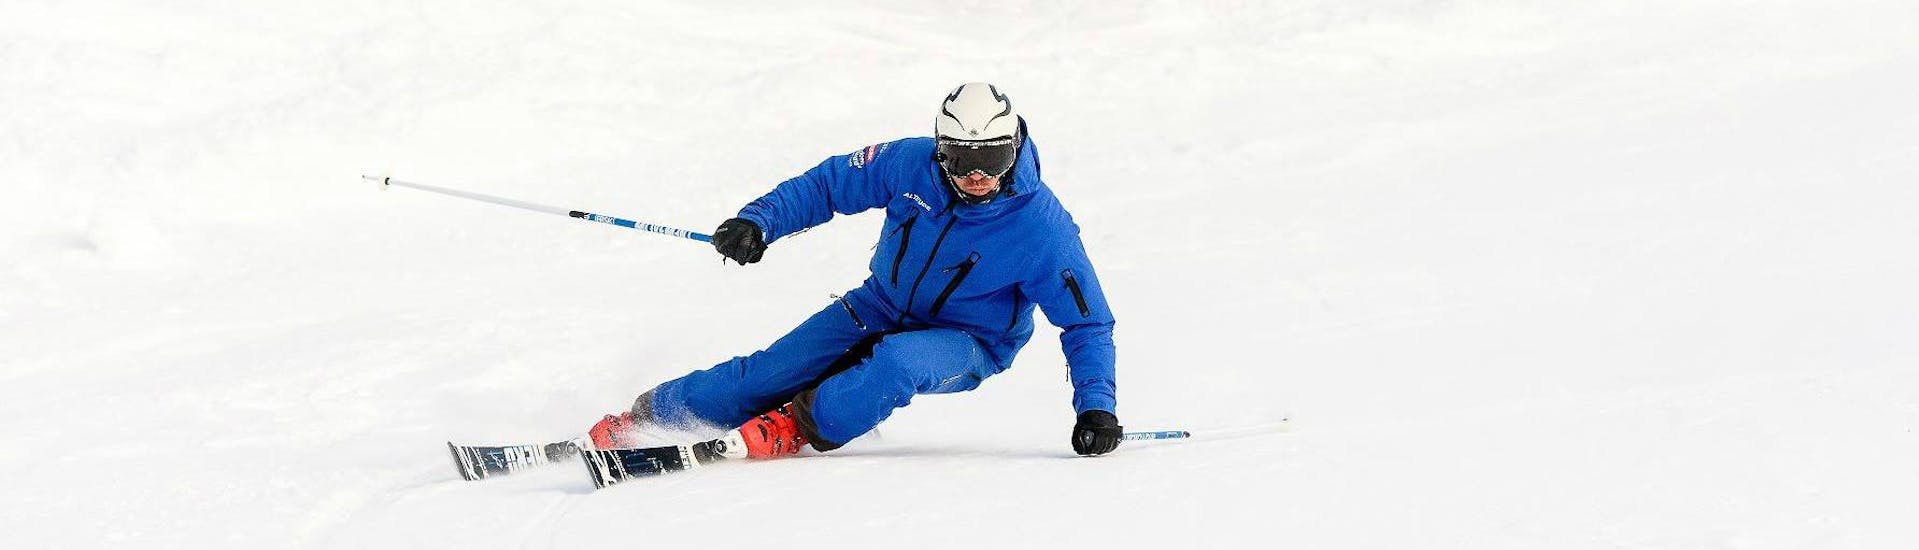 During the Private Ski Lessons for Adults - All Levels with Altitude Ski School Zermatt, a ski instructor is demonstrating the correct carving technique.